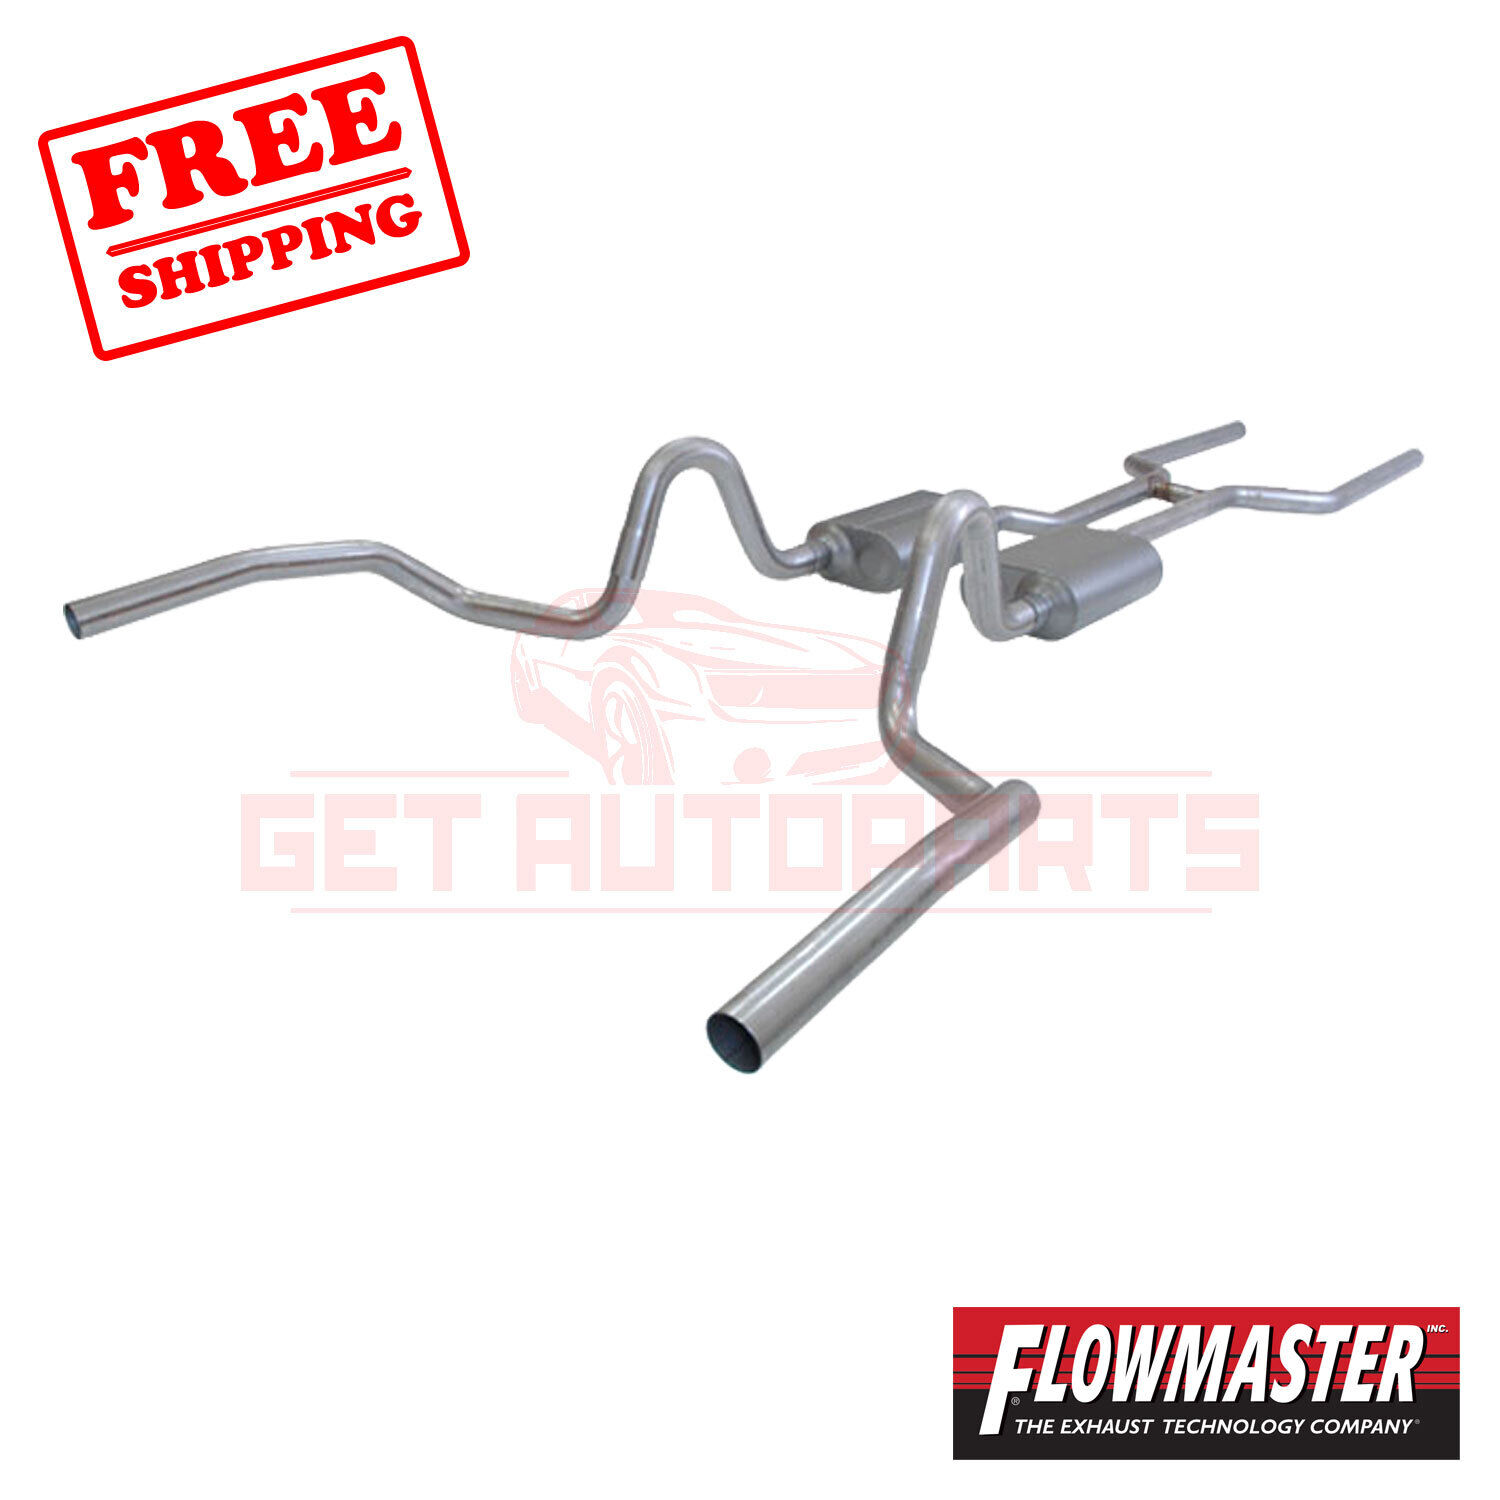 FlowMaster Exhaust System Kit for Buick GS 400 1968-1969